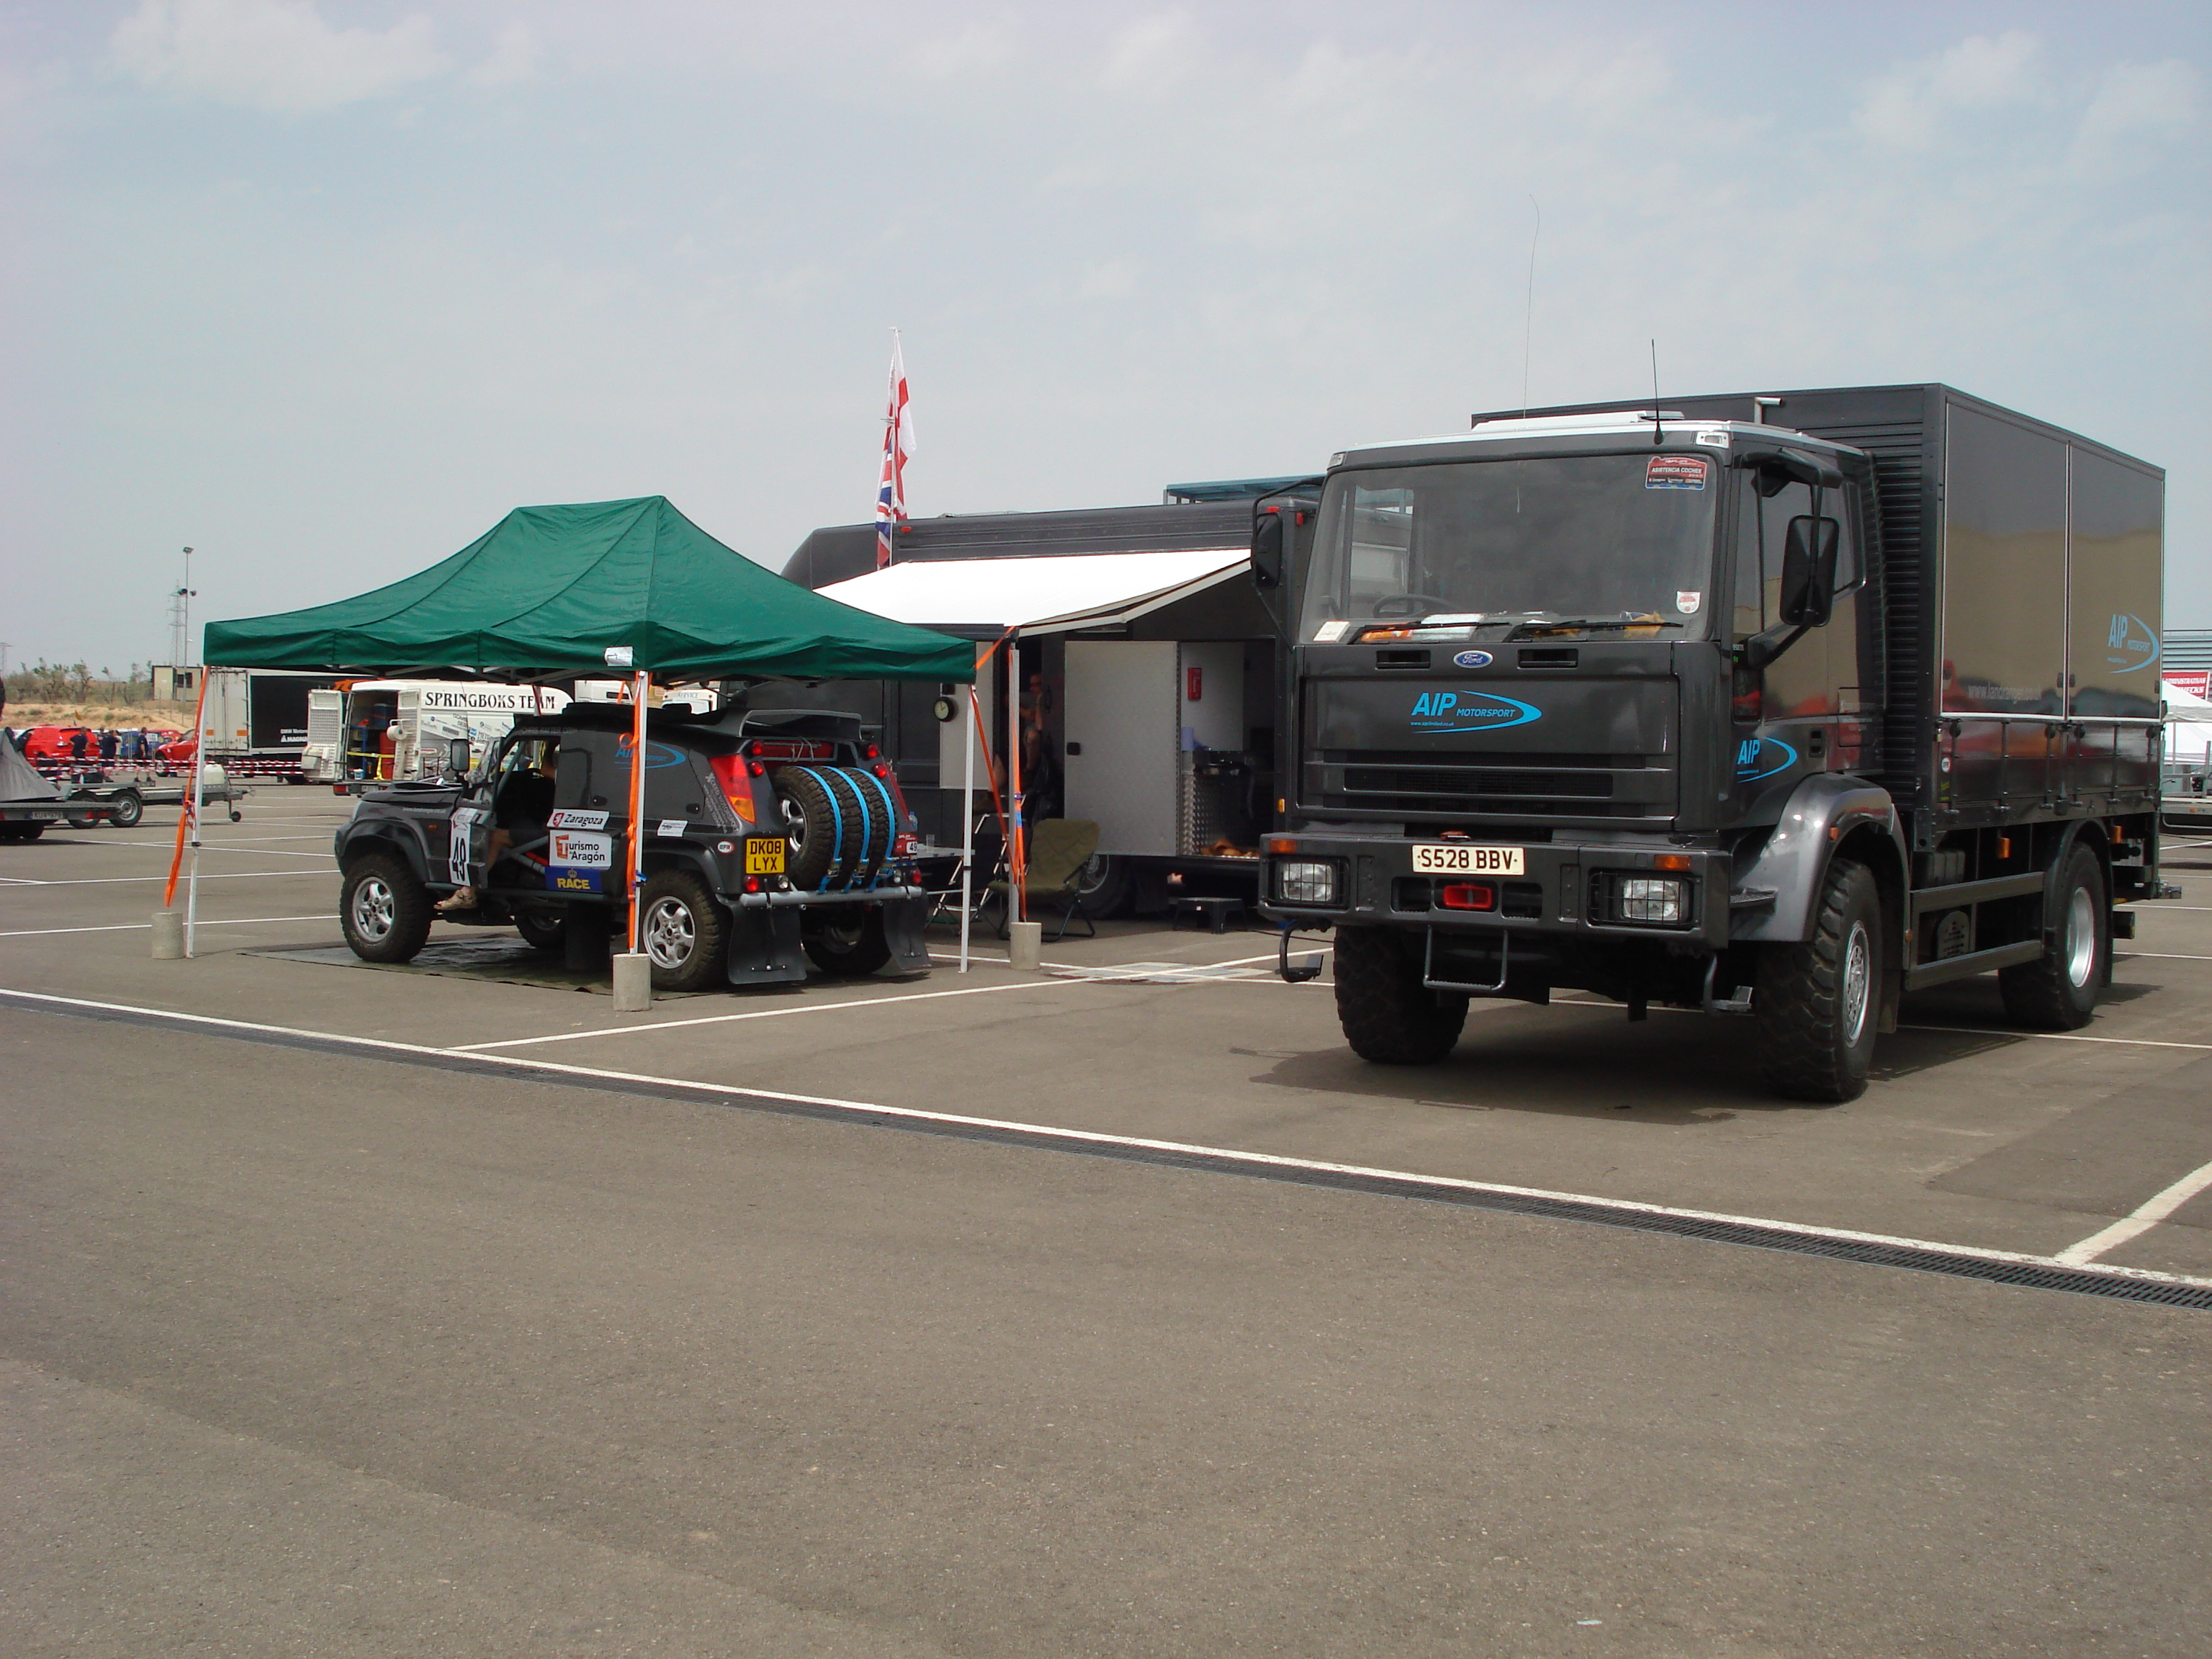 Xceed- AIP Motorsport Support Vehicles